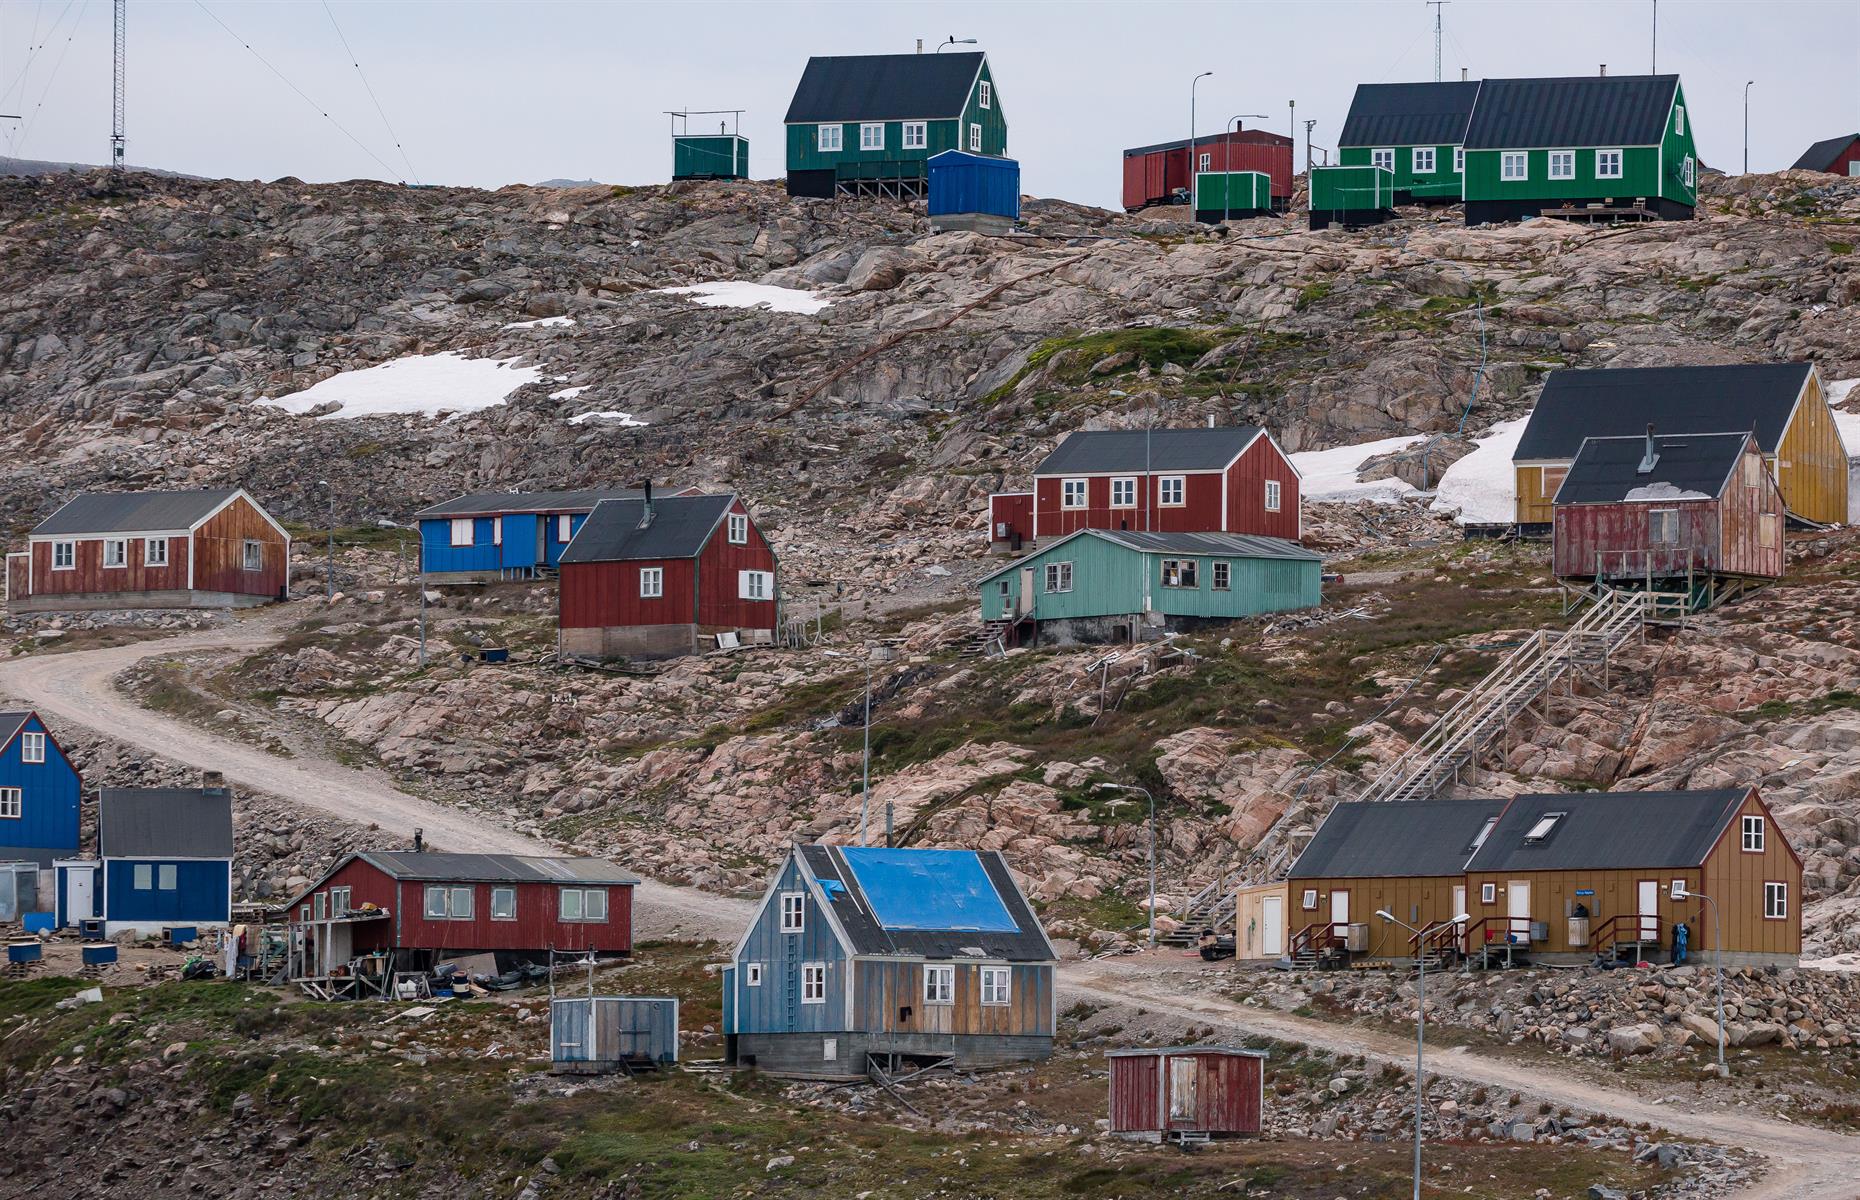 Ultimate isolation: inside the world’s most remote towns